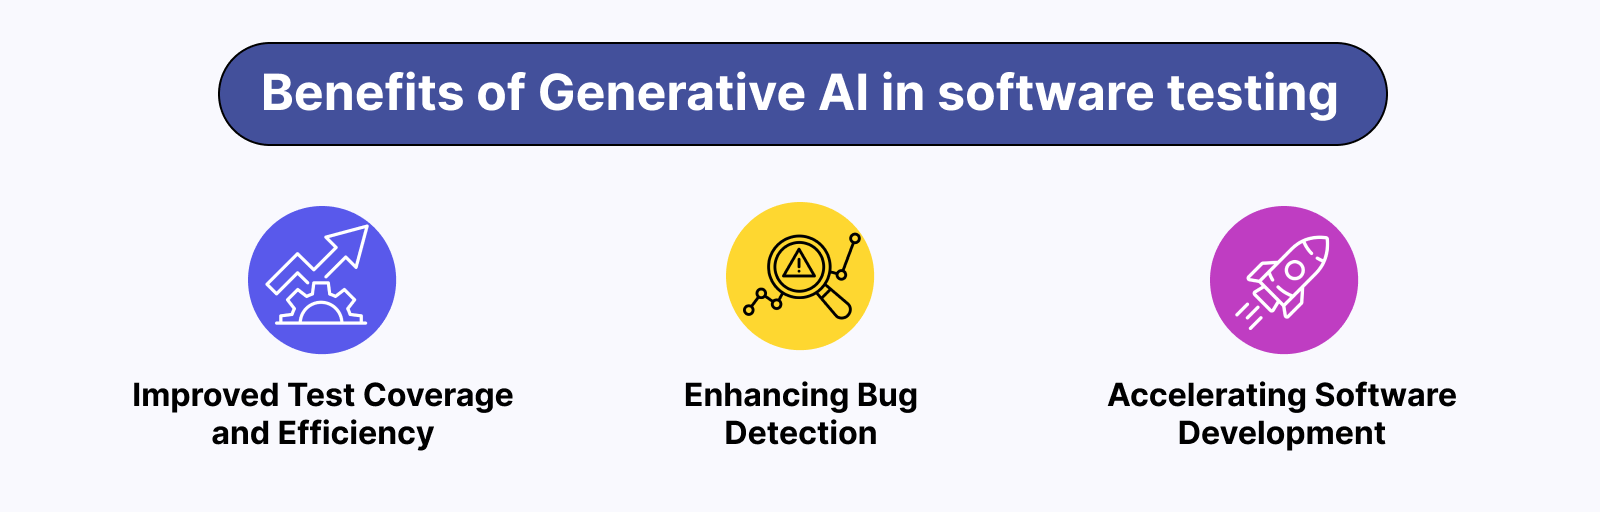 Benefits of Generative AI in Software Testing